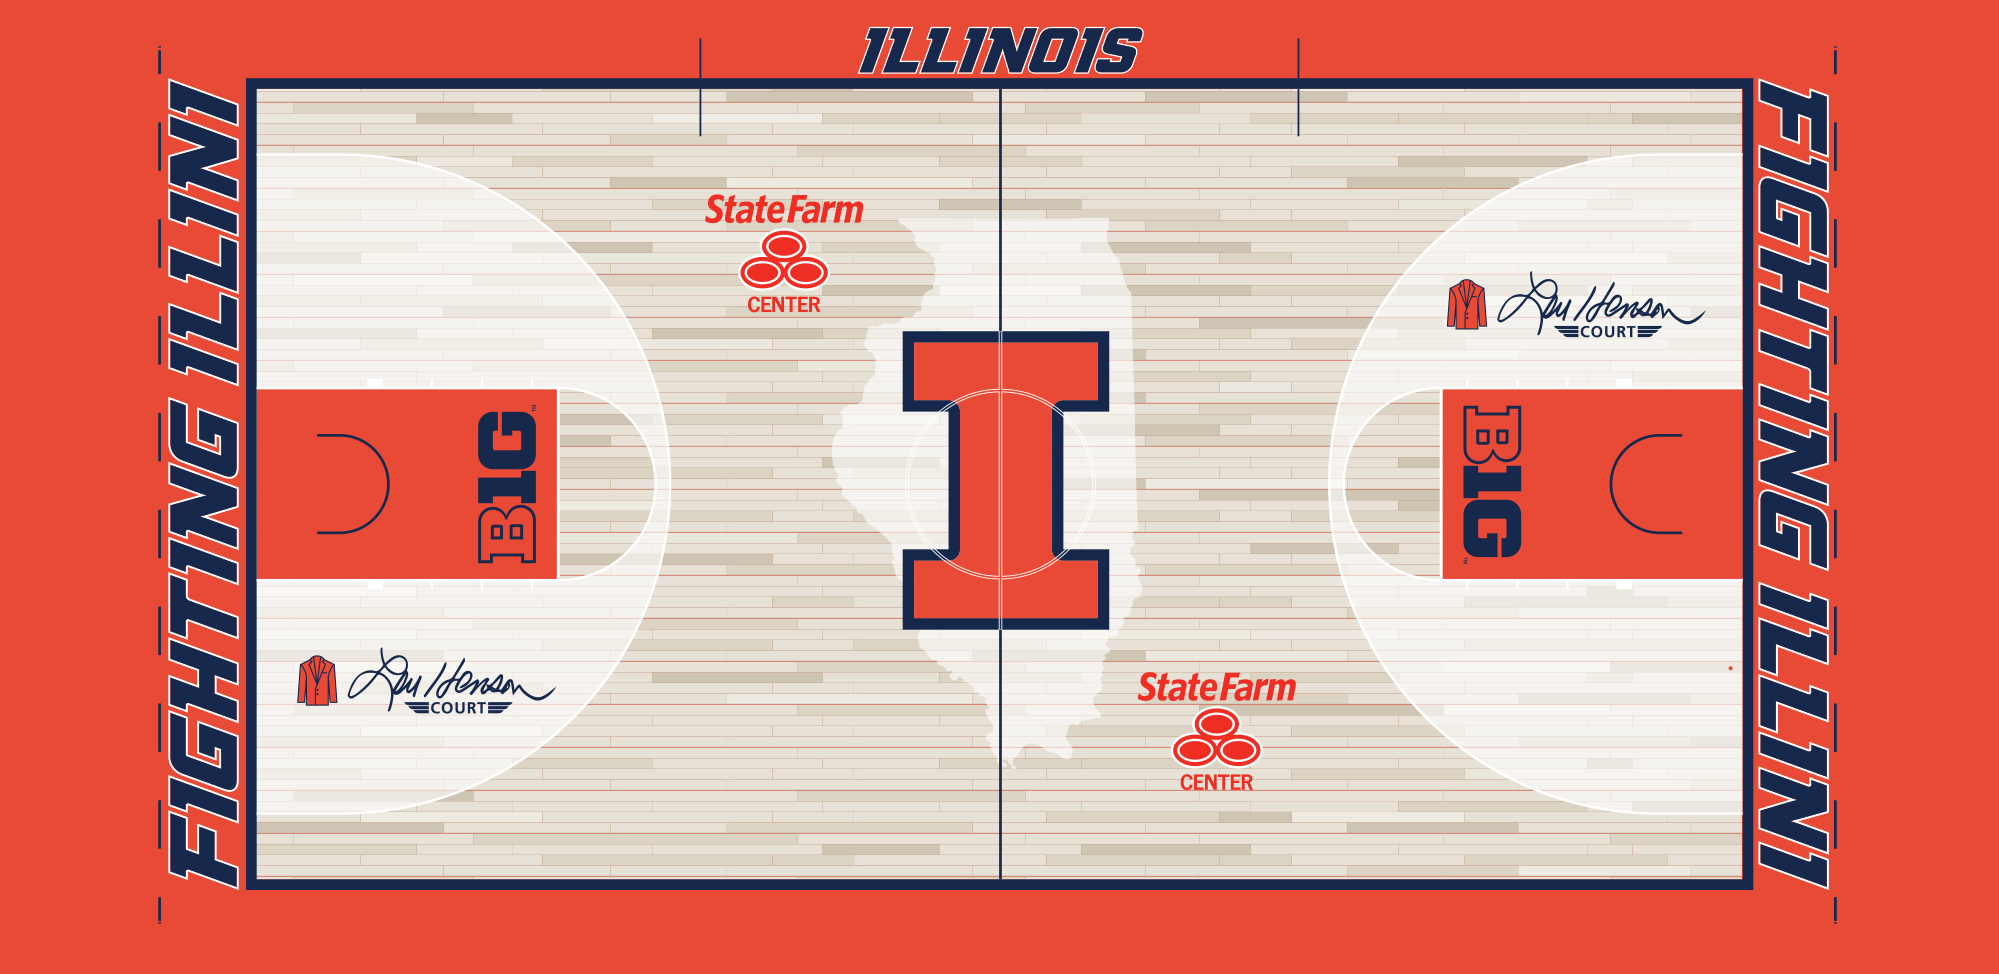 Illinois to Name Court After Lou Henson - HoopDirt